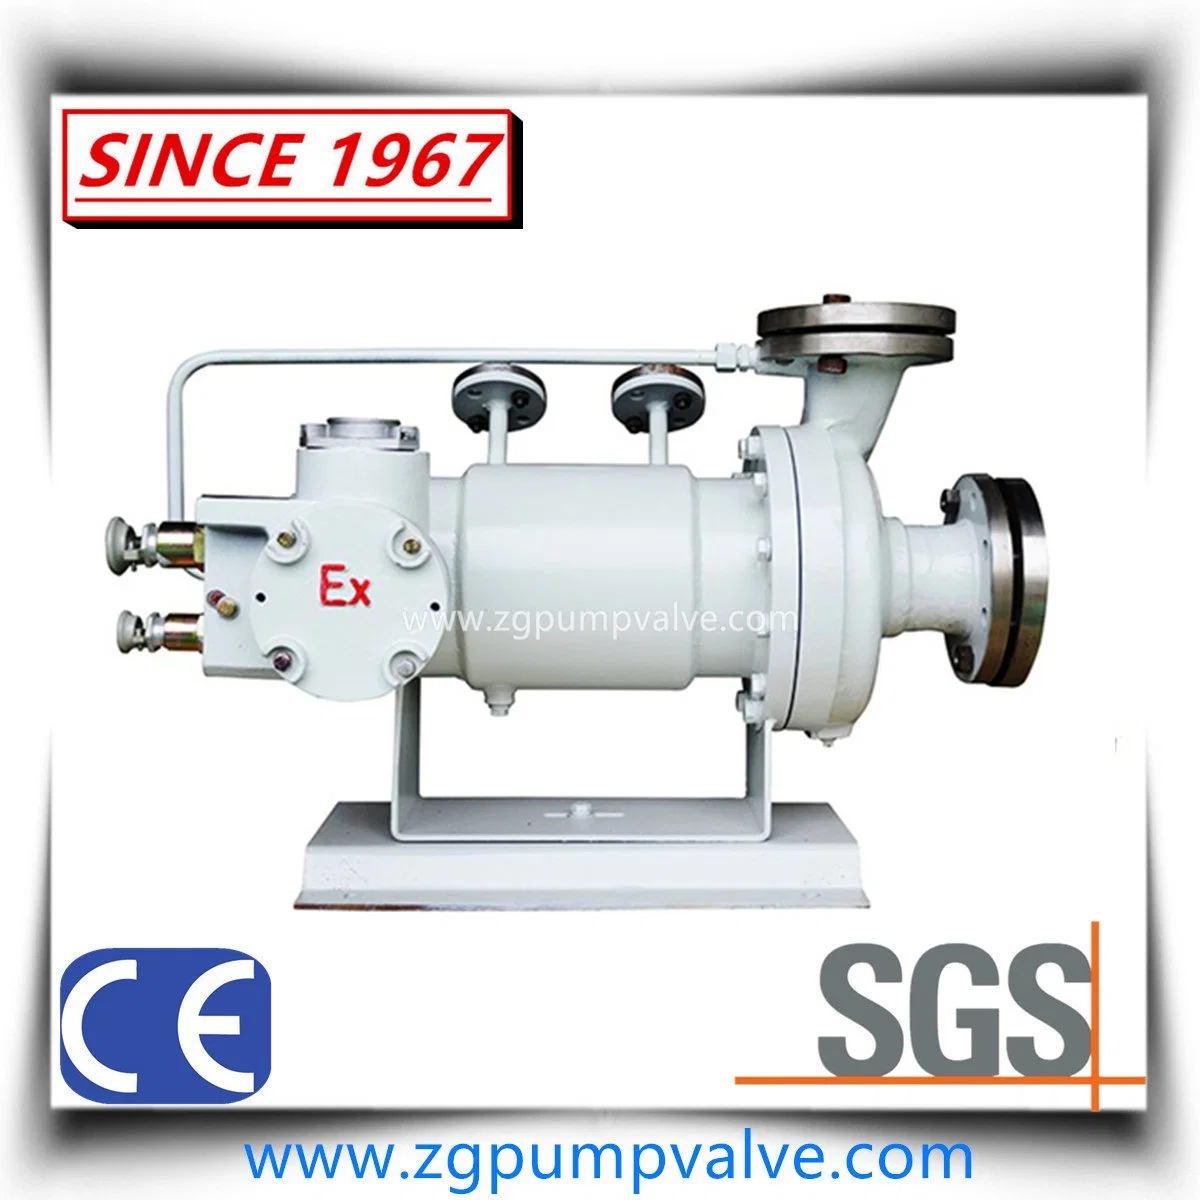 High Pressure&Temperature Large Size Chemical Canned Motor Pump/Shield Pump No Leakage/Explosion Proof for Nuclear/Supercritical Process/Temperature Test